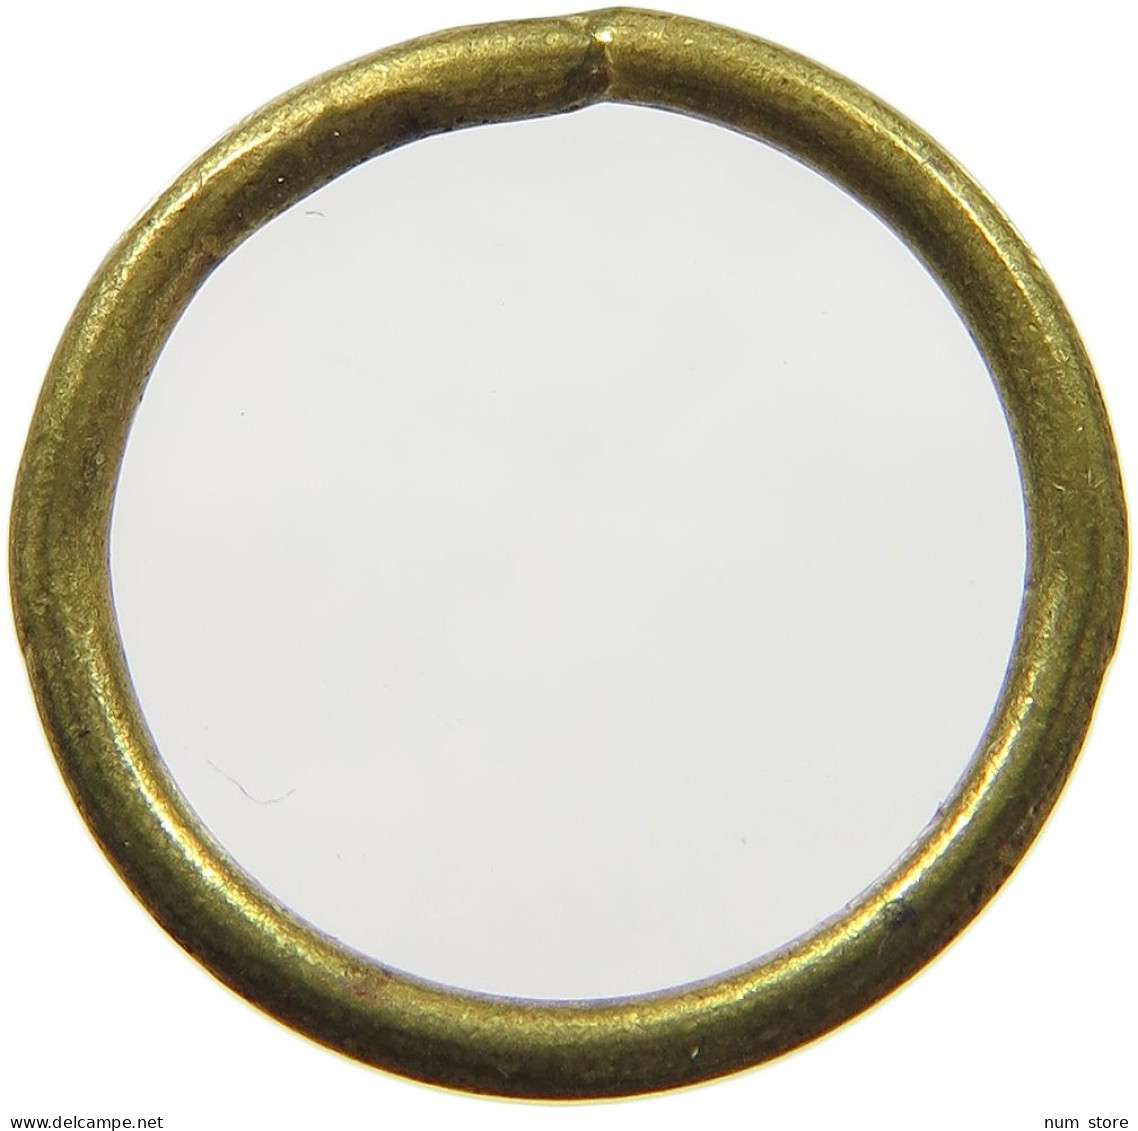 WEST AFRICA BRONZE RING MANILLA   #t124 0295 - French West Africa